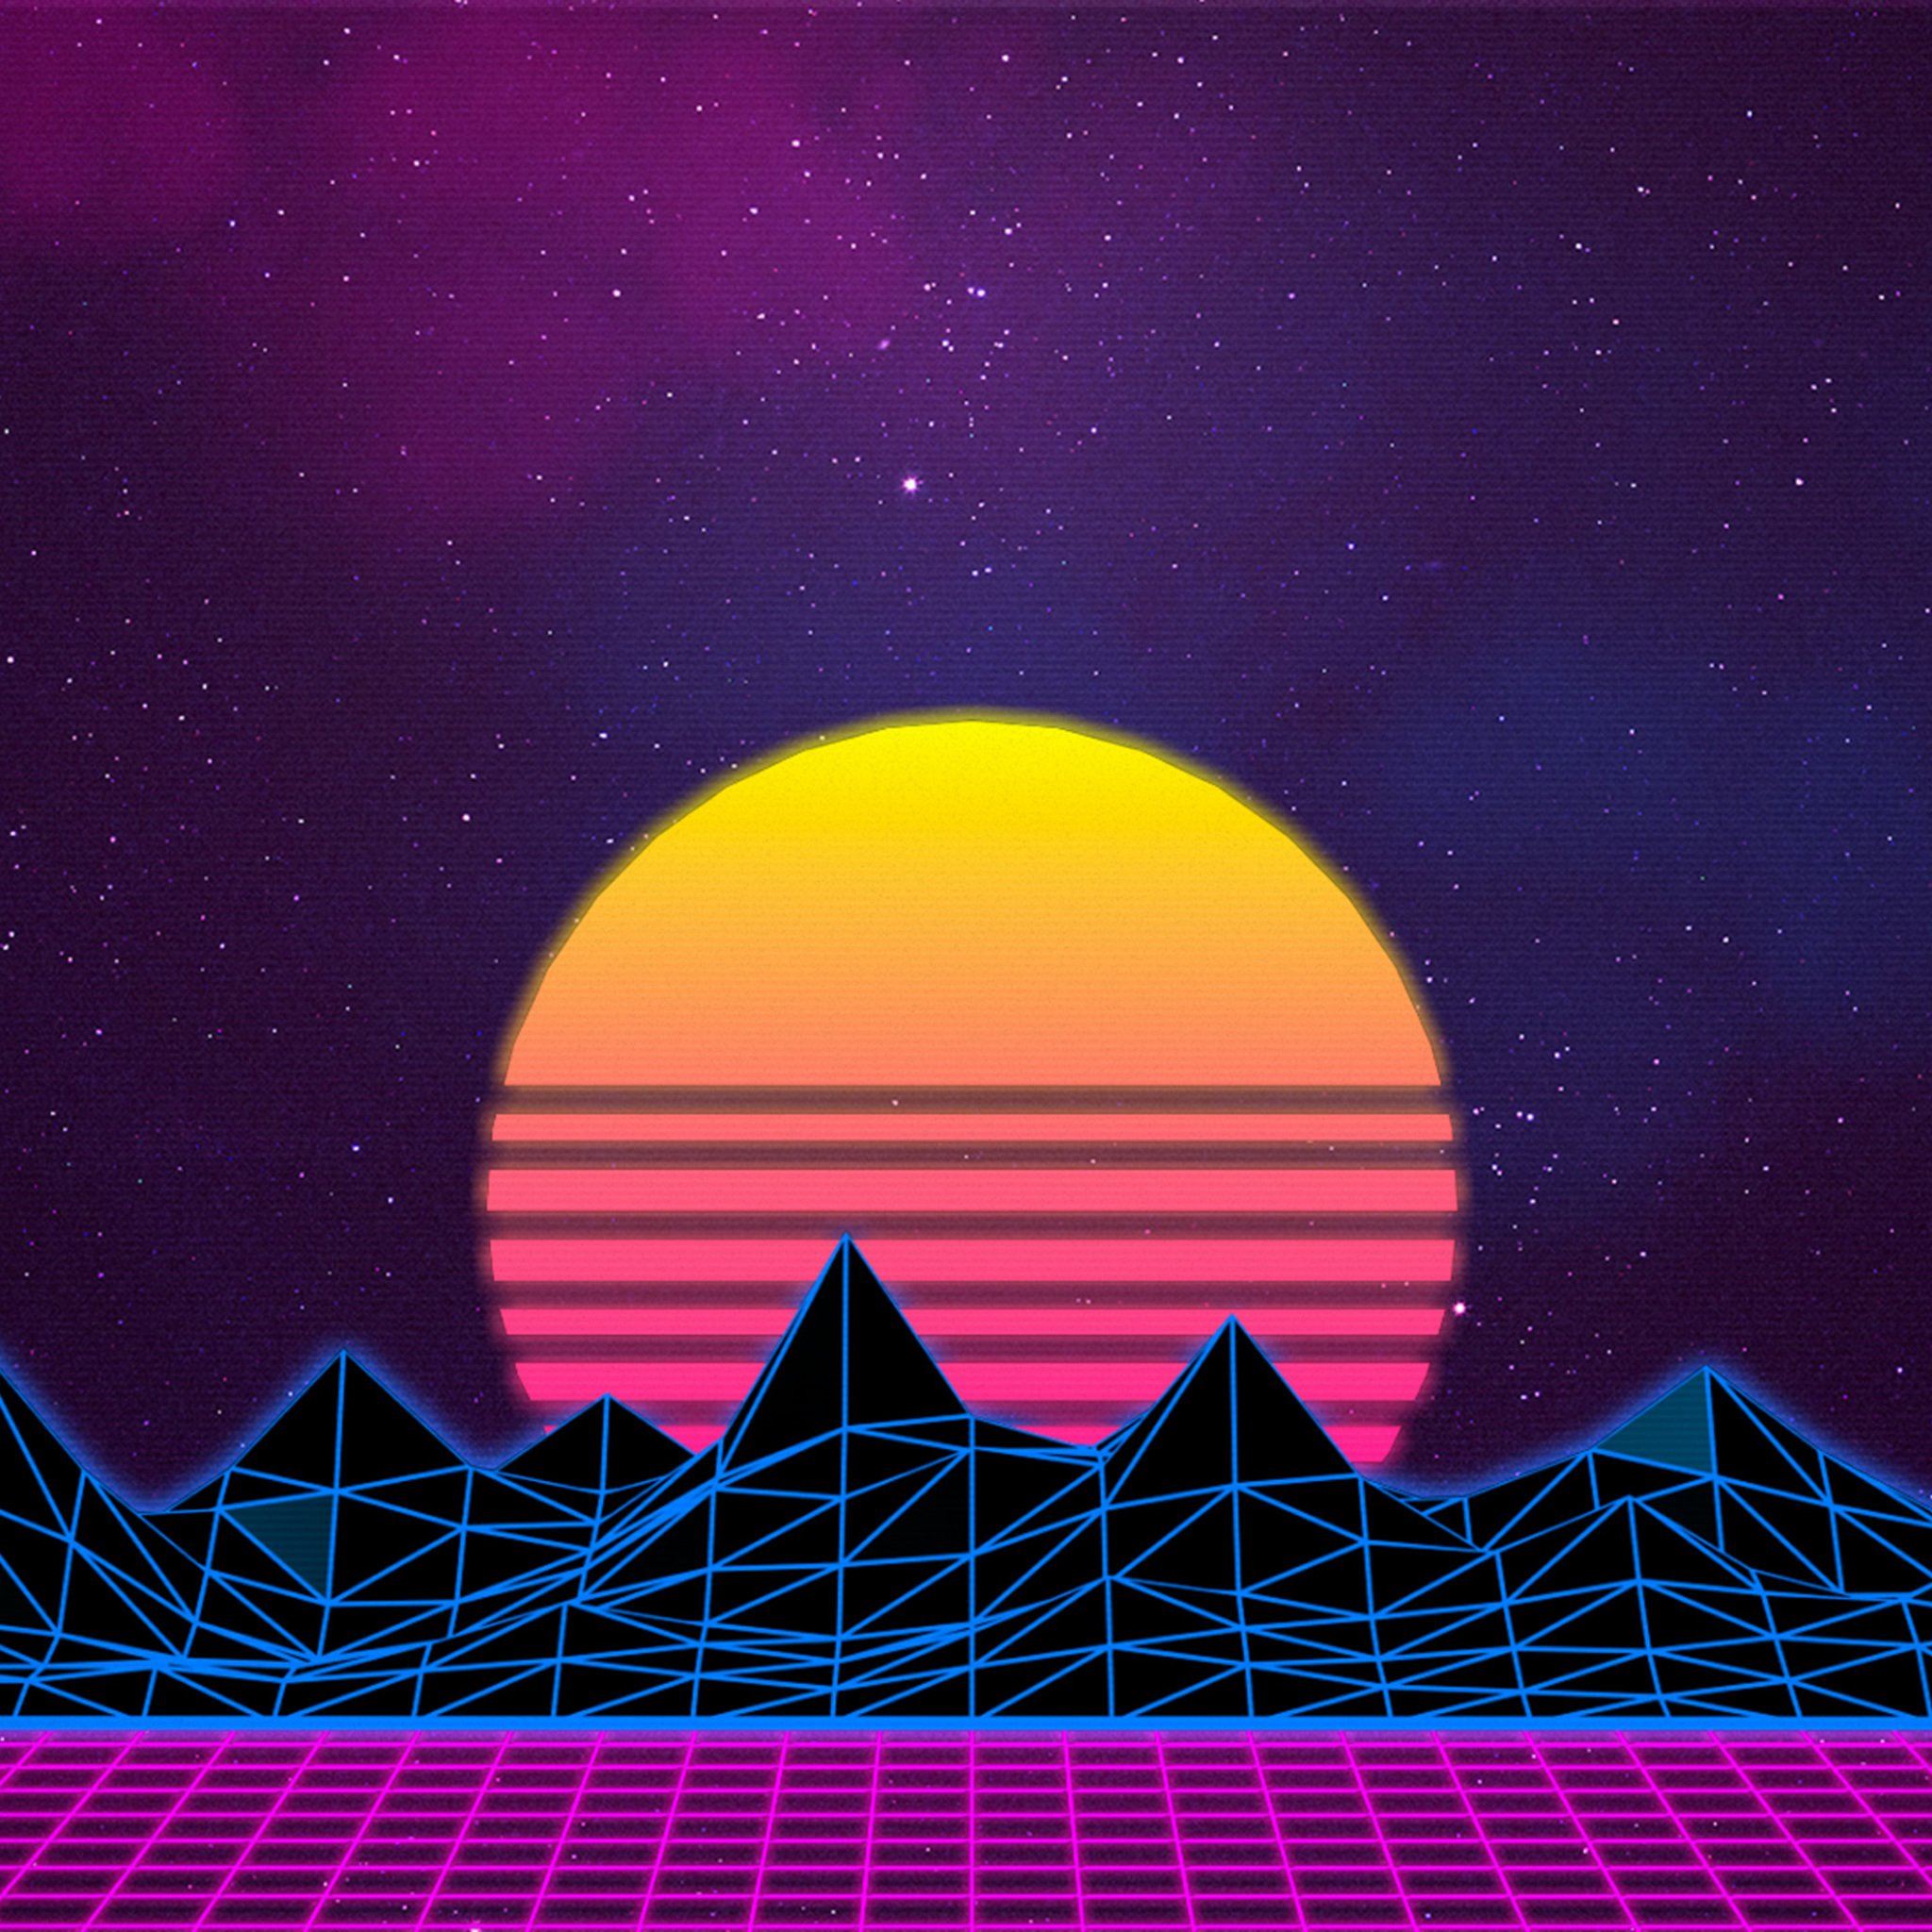 2048x2048 Retrowave Ipad Air HD 4k Wallpapers, Image, Backgrounds